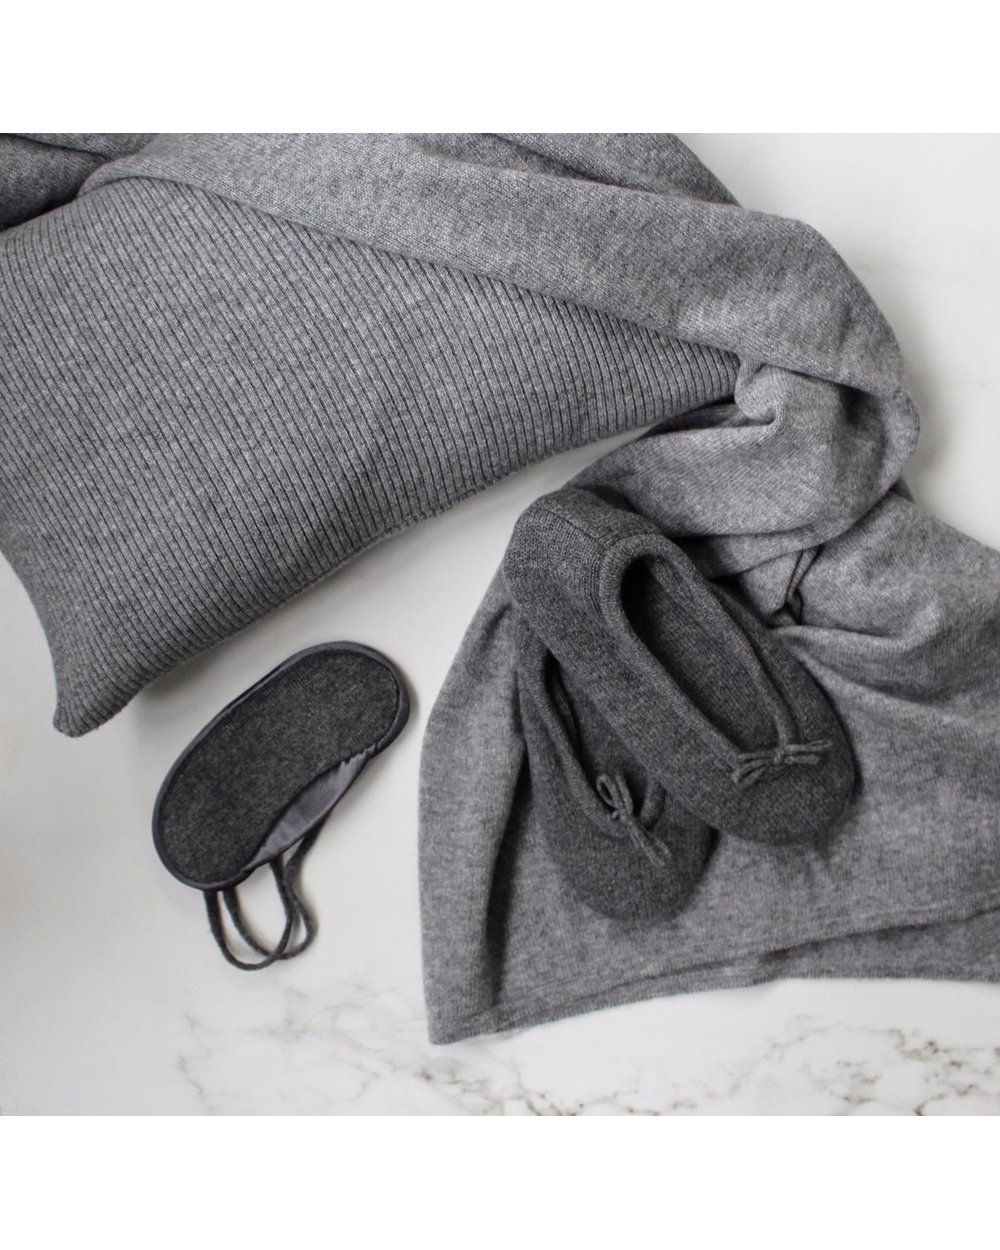 Elle + Riley Cashmere Slippers, $159